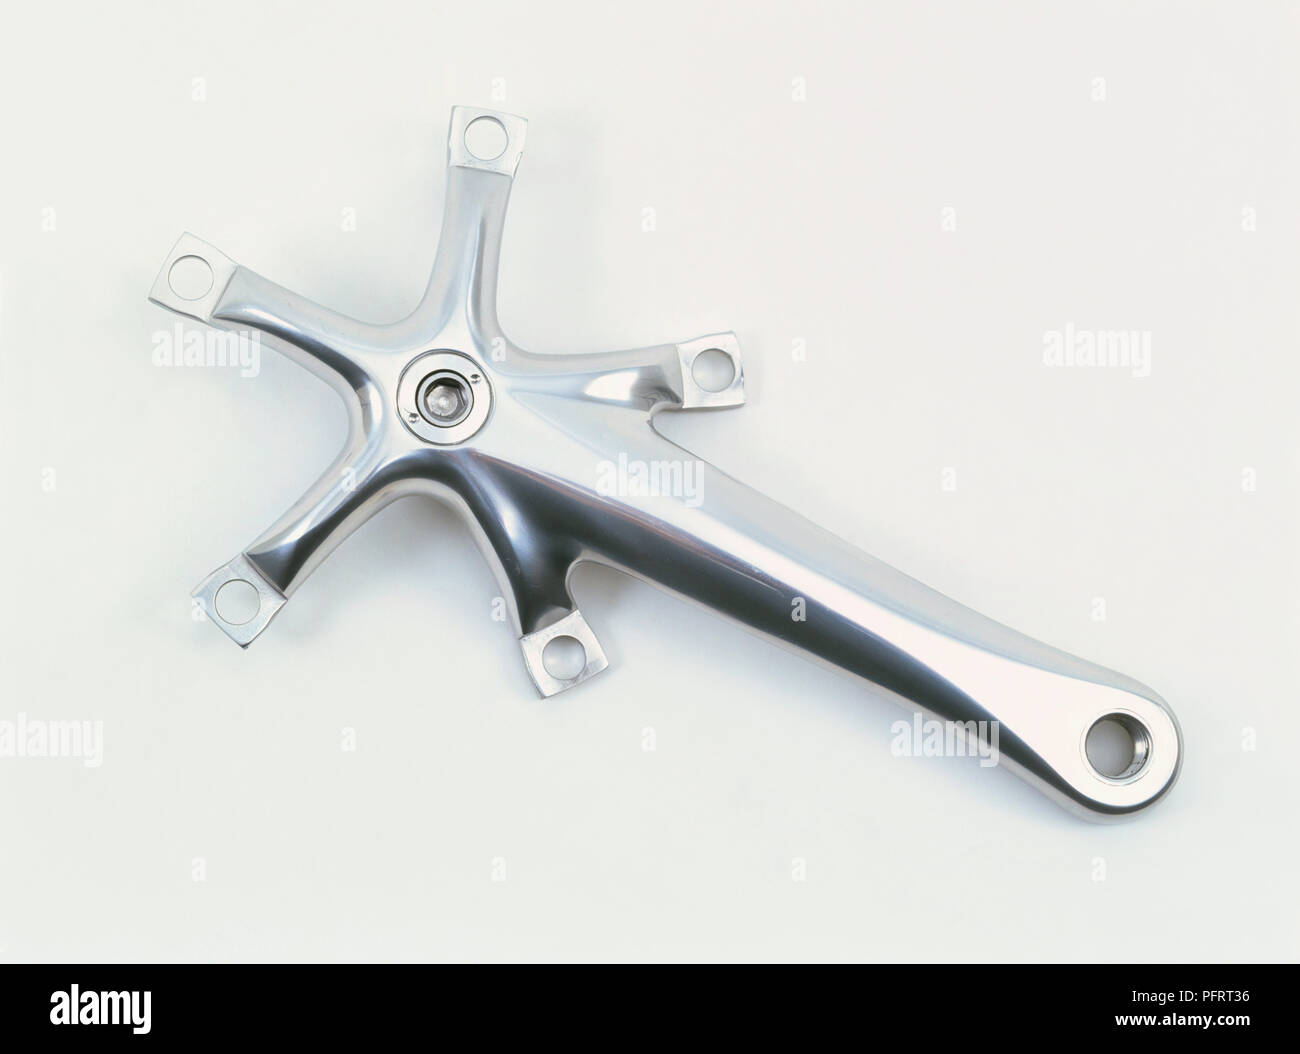 Road bicycle crank assembly Stock Photo